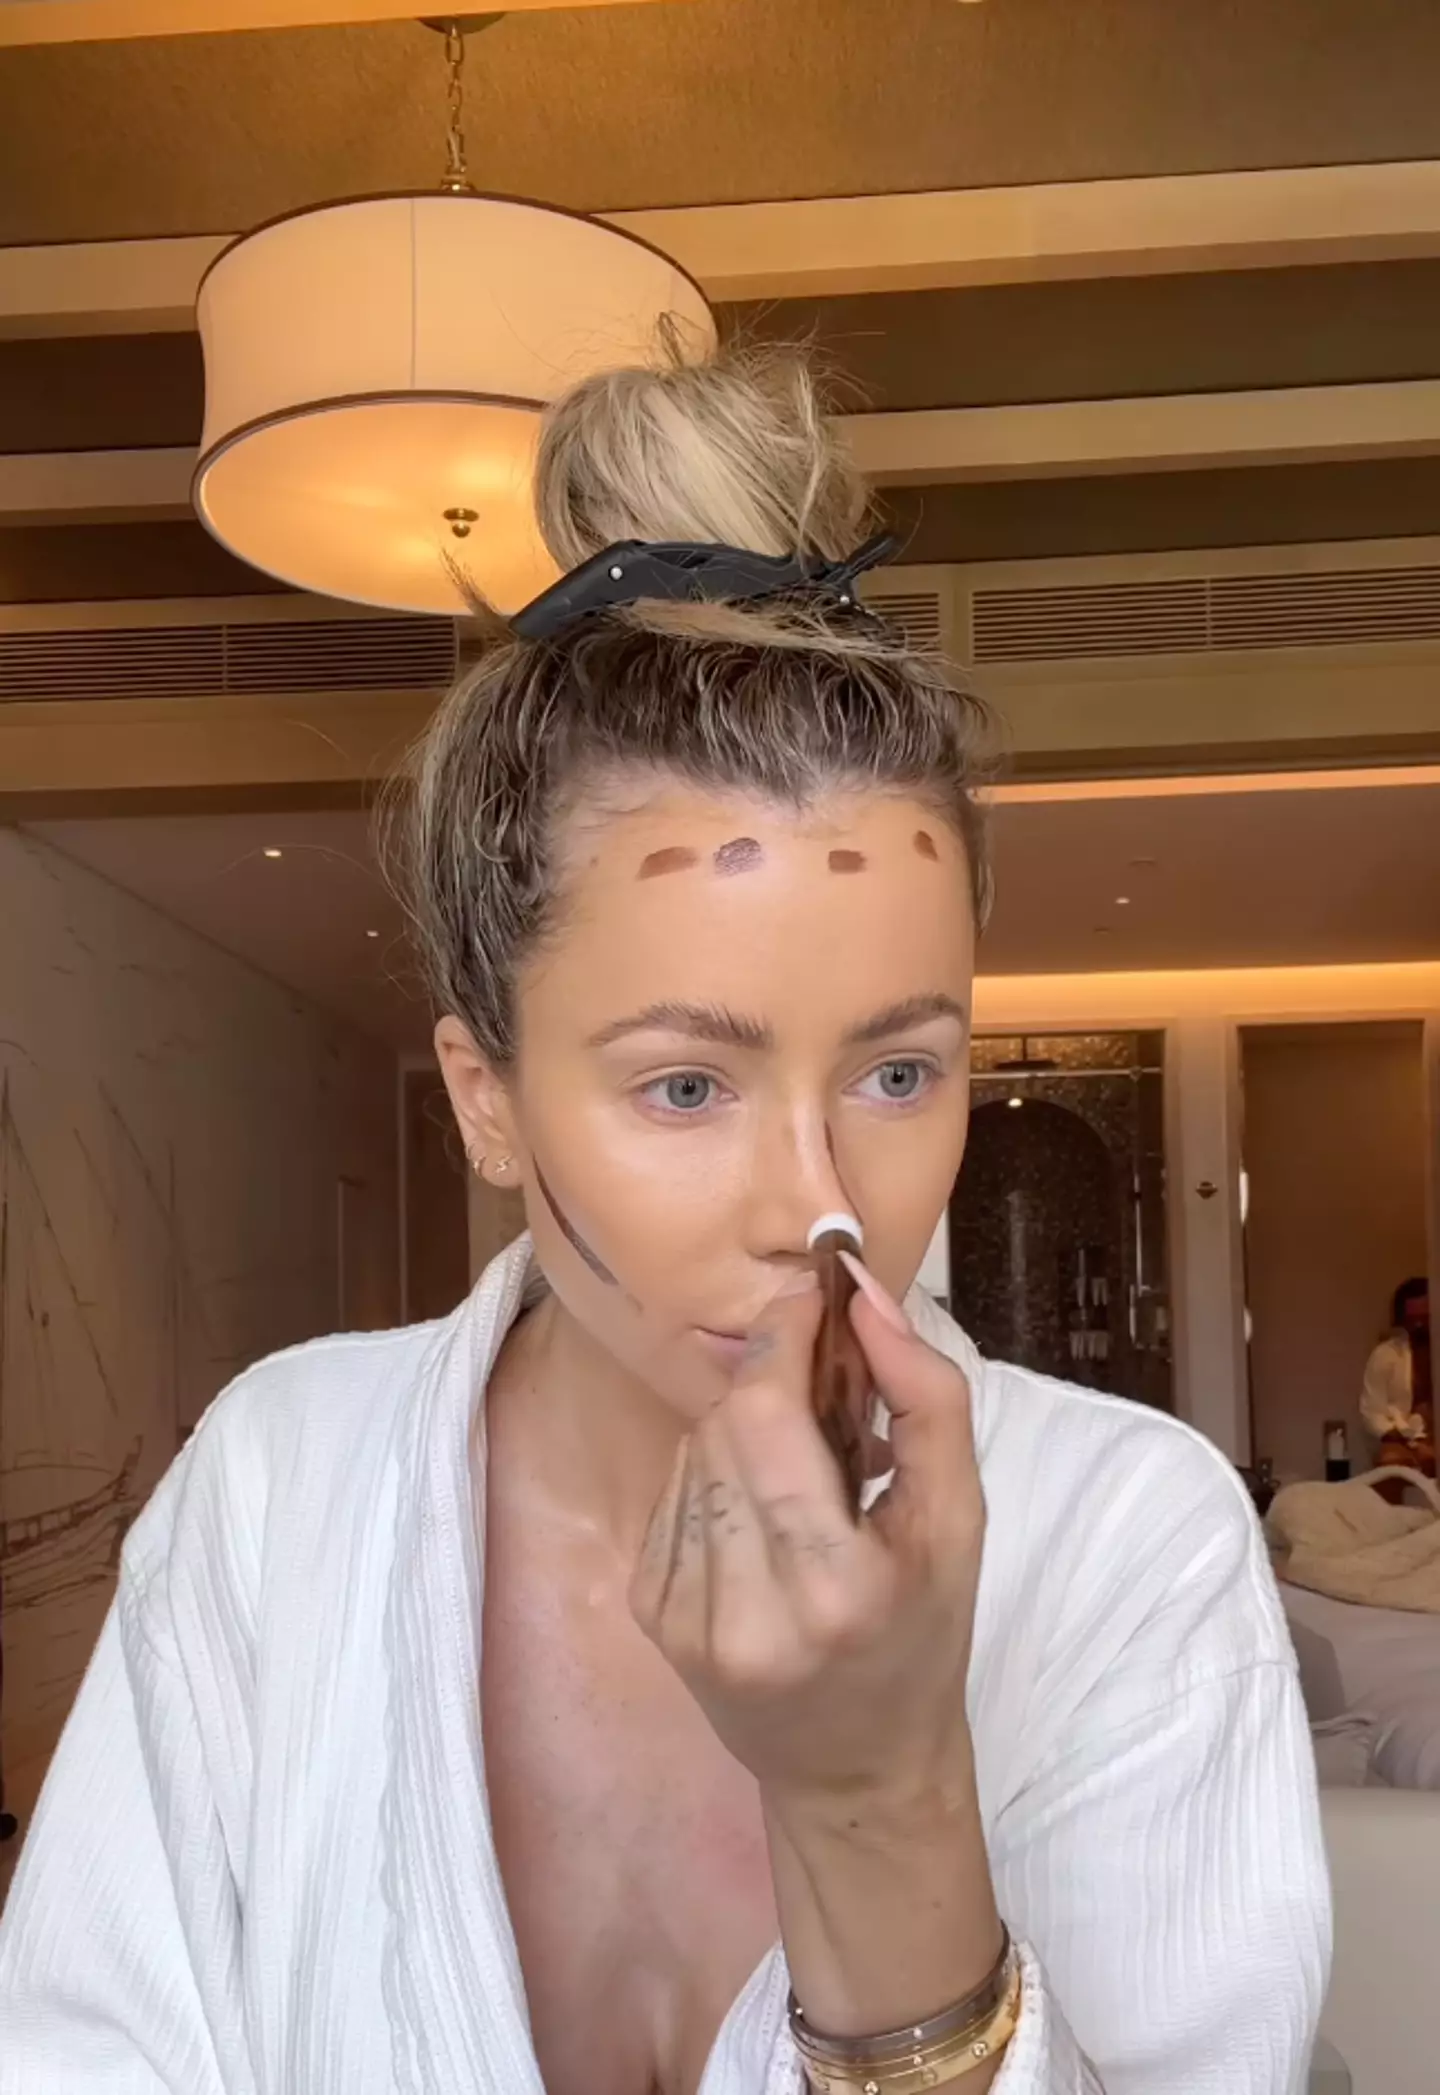 Olivia Attwood shared a 'Get Ready with Me' make-up video with her followers.